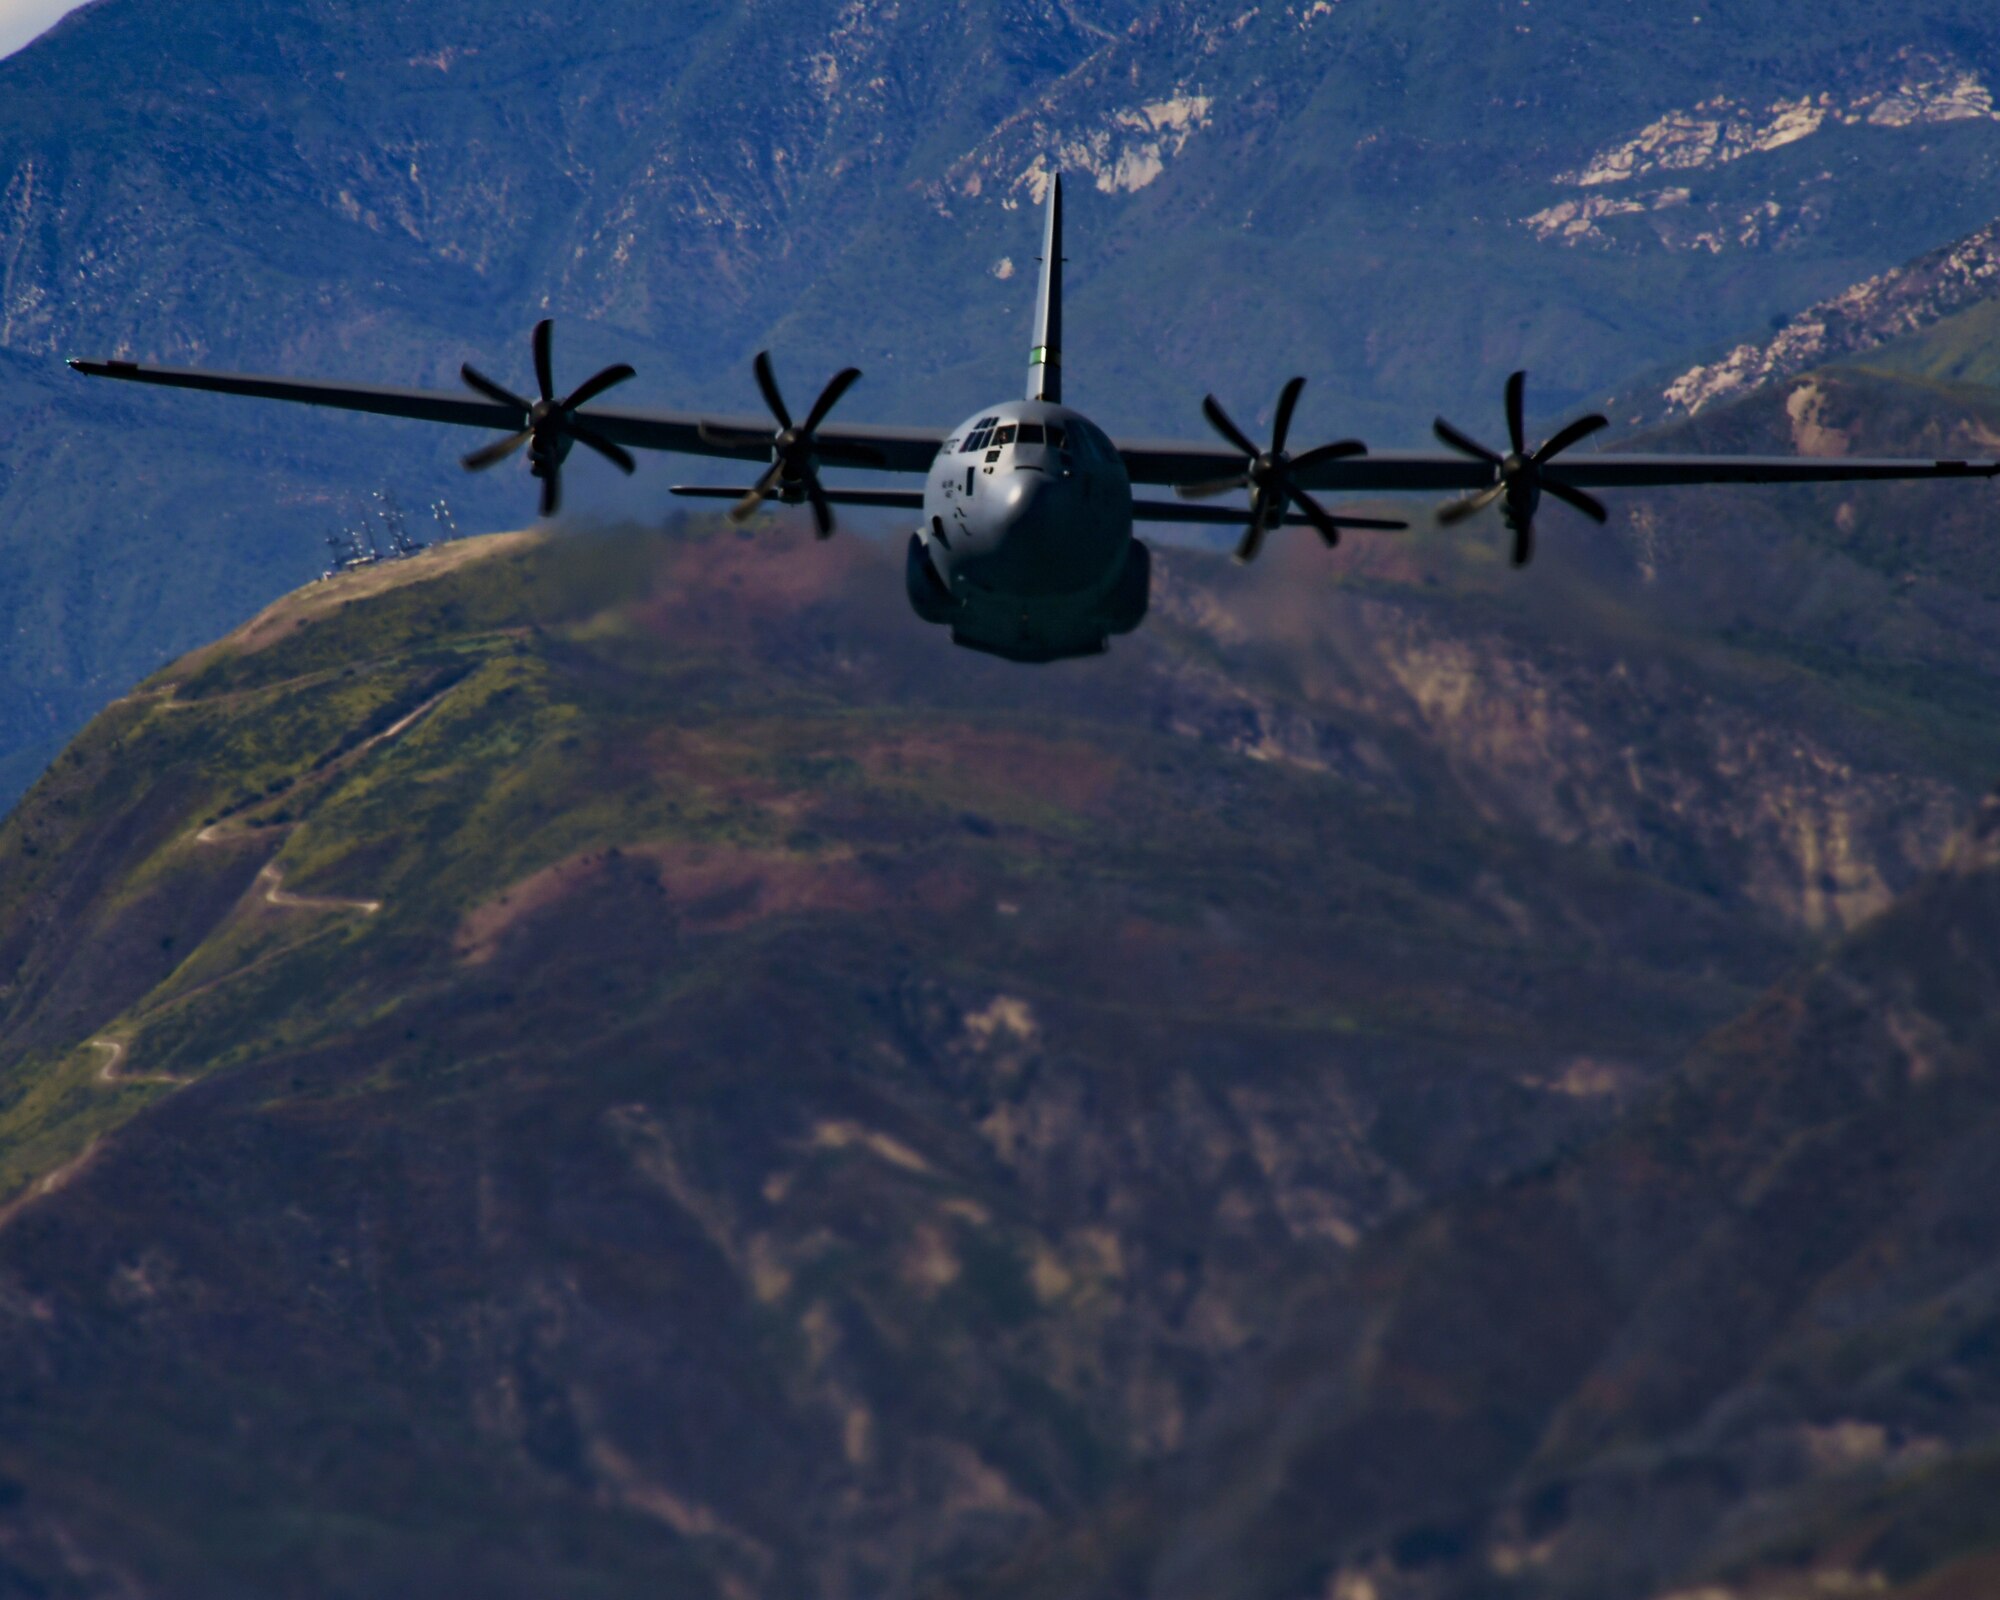 A military C-130J aircraft from the California Air National Guard fly's over green rolling hills above the city of Santa Barbara, California.